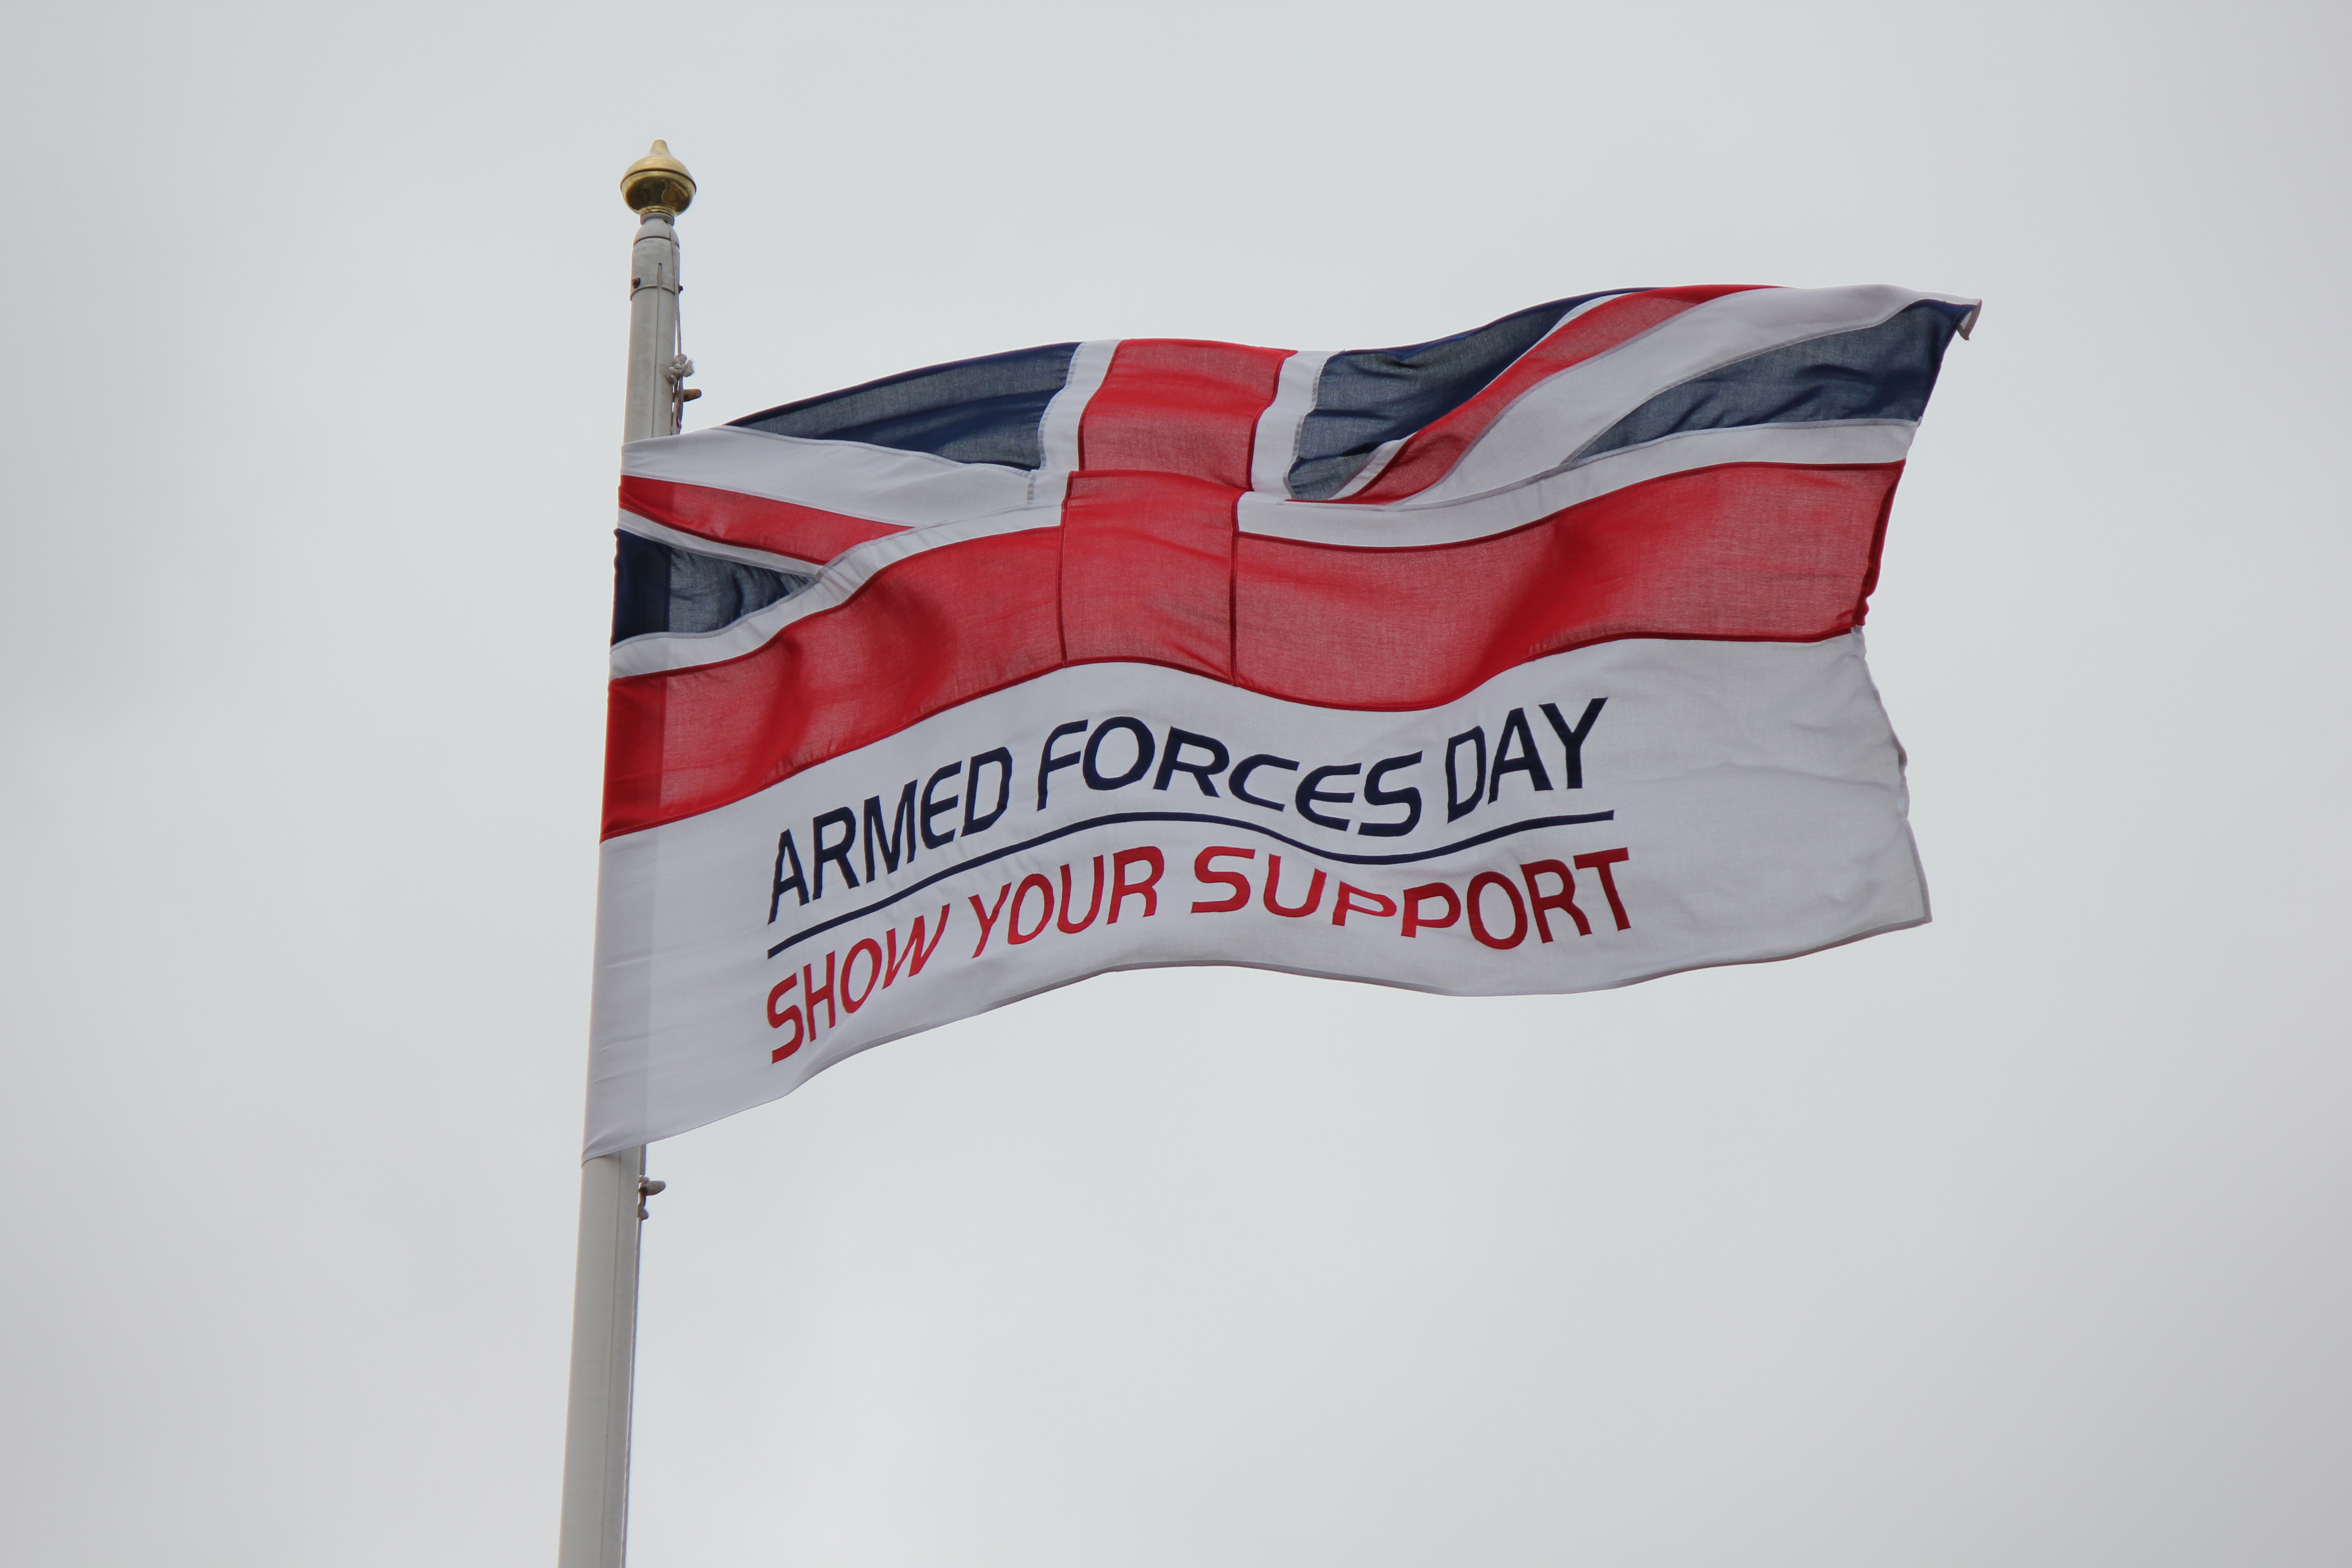 Photograph of the Armed Forces Day flag